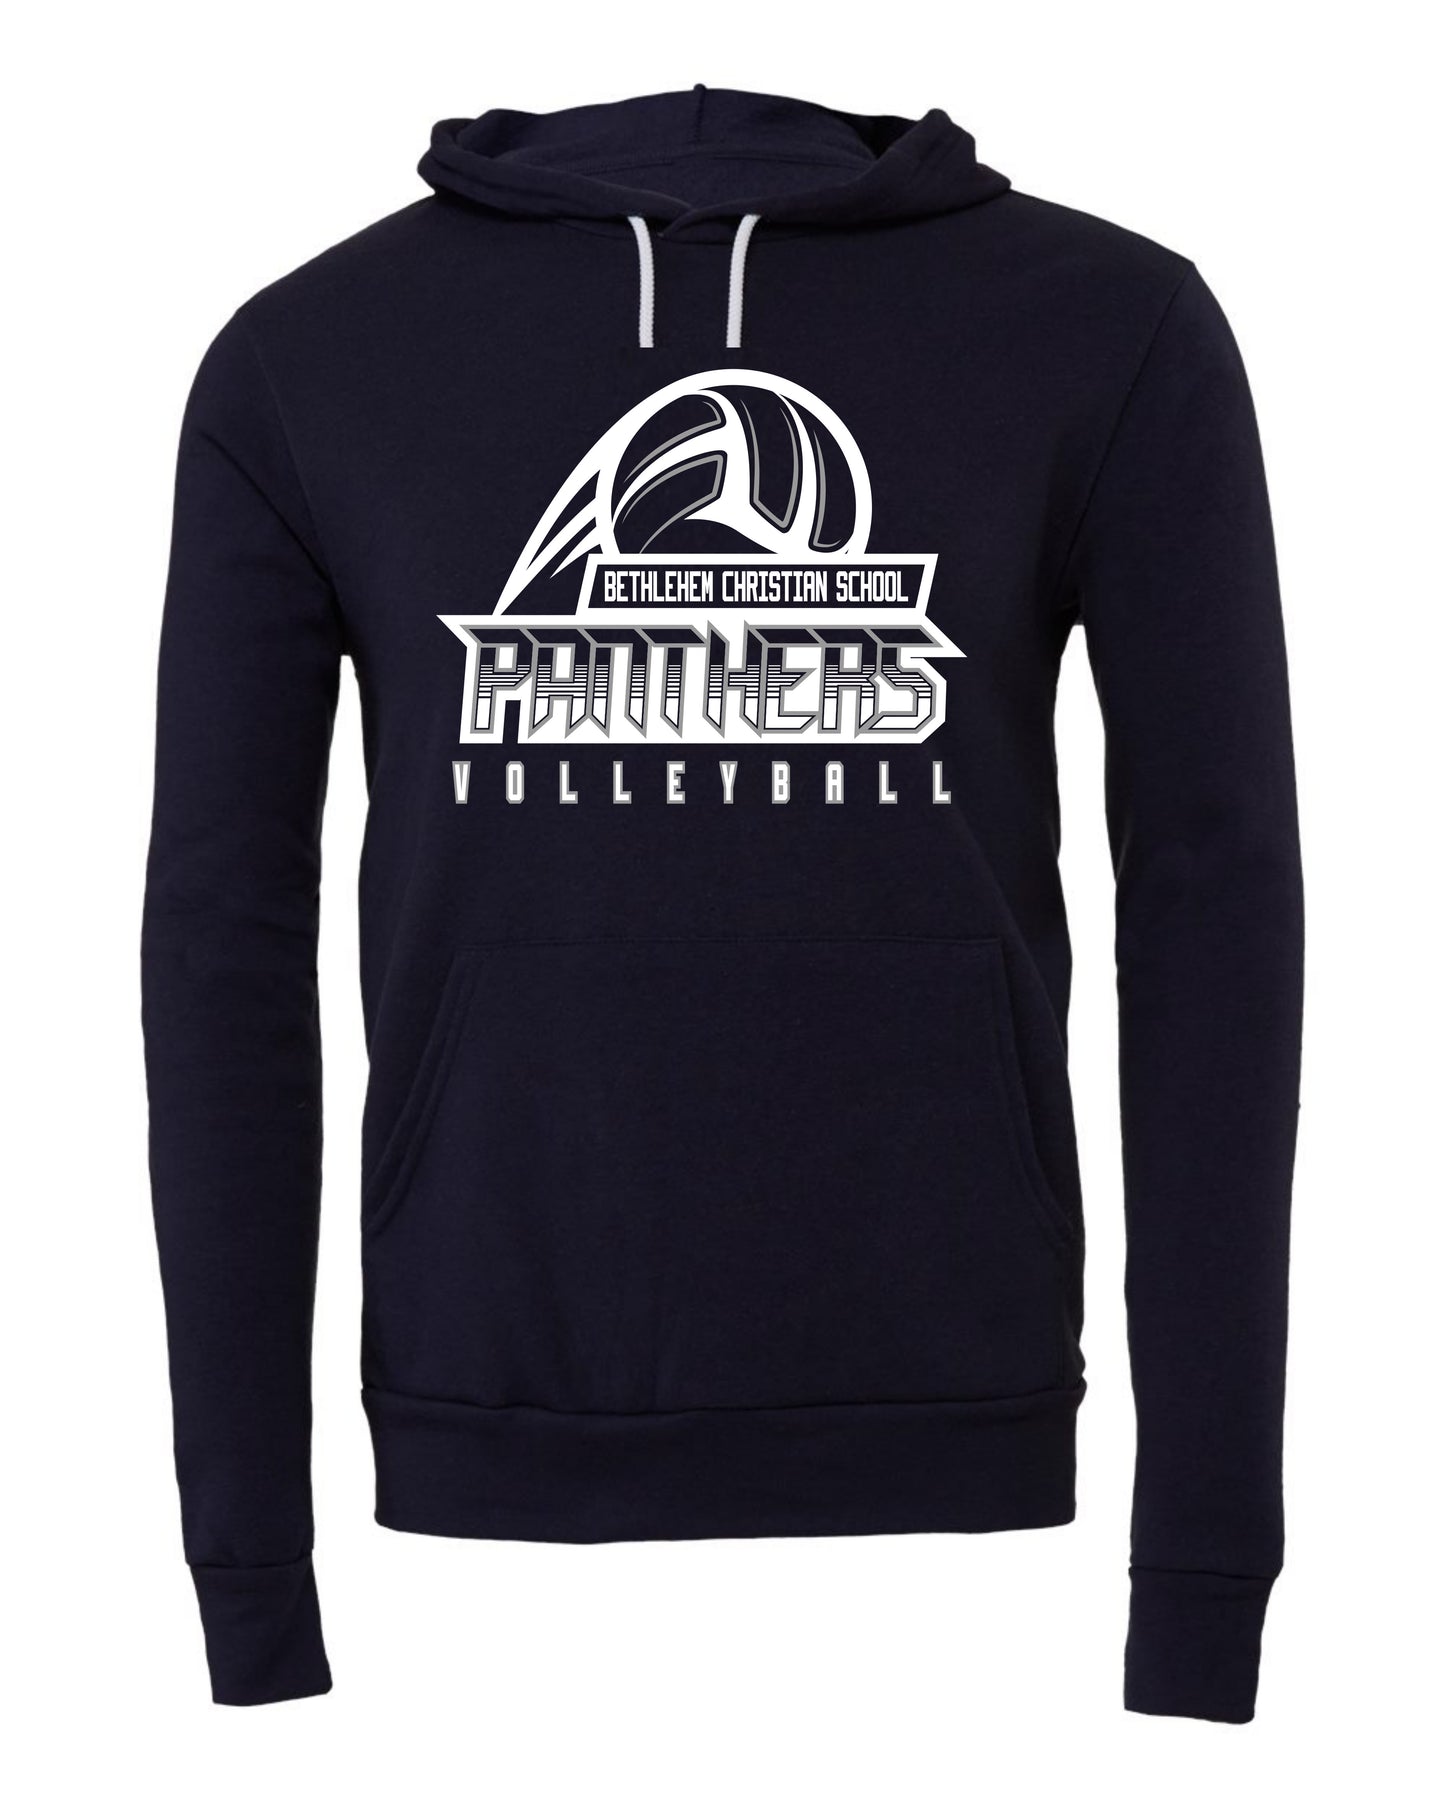 BCS Panthers Volleyball - Adult Hoodie